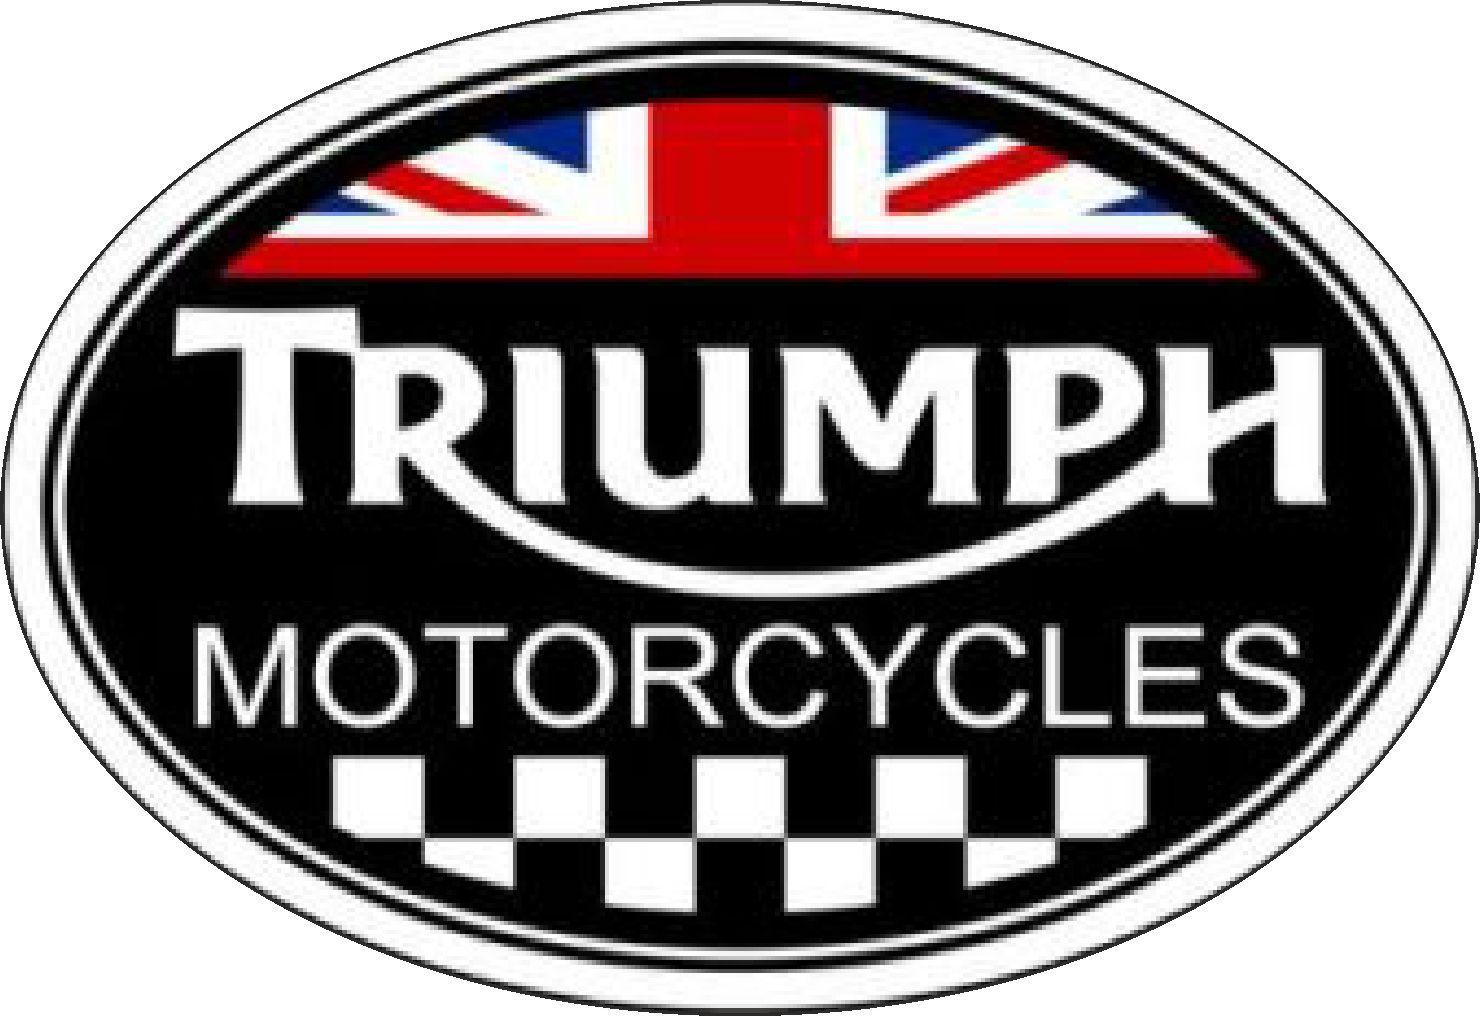 Triumph Motorcycle Logo - Triumph Motorcyles fined $2.9 million over defect data. Protecting